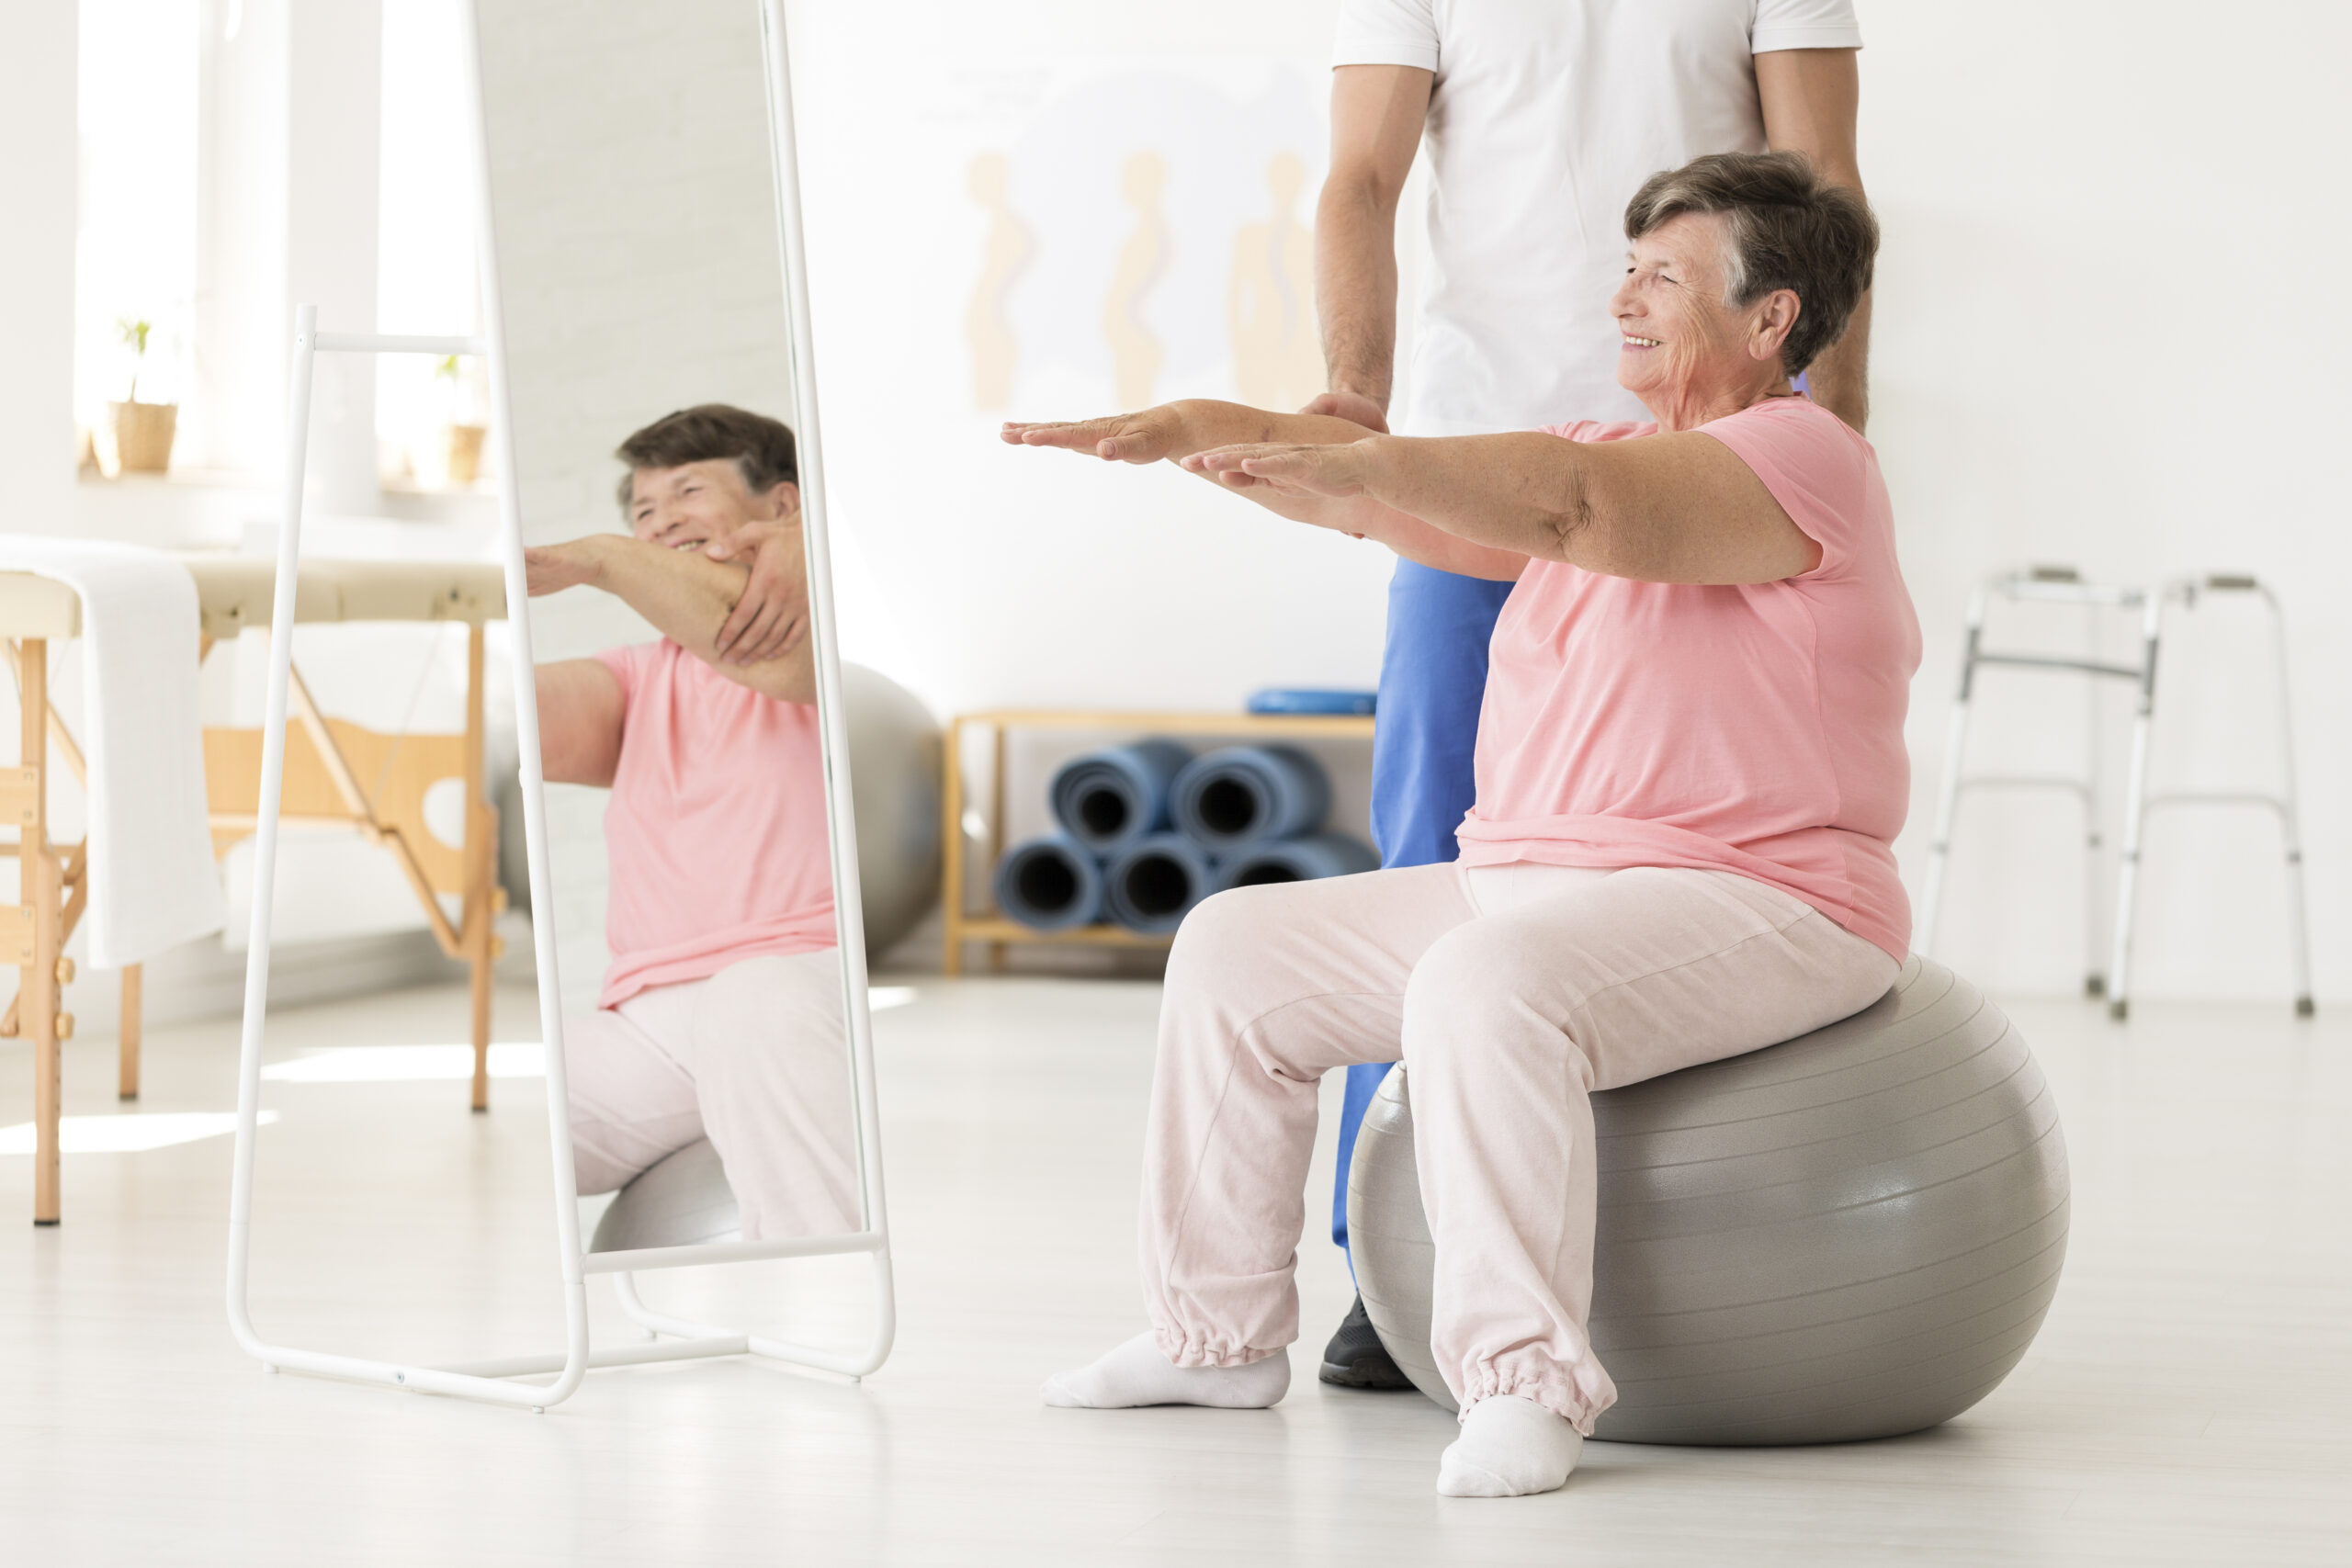 10min Standing Strength Weights Workout for Older Adults & Seniors at home  (low intensity) 